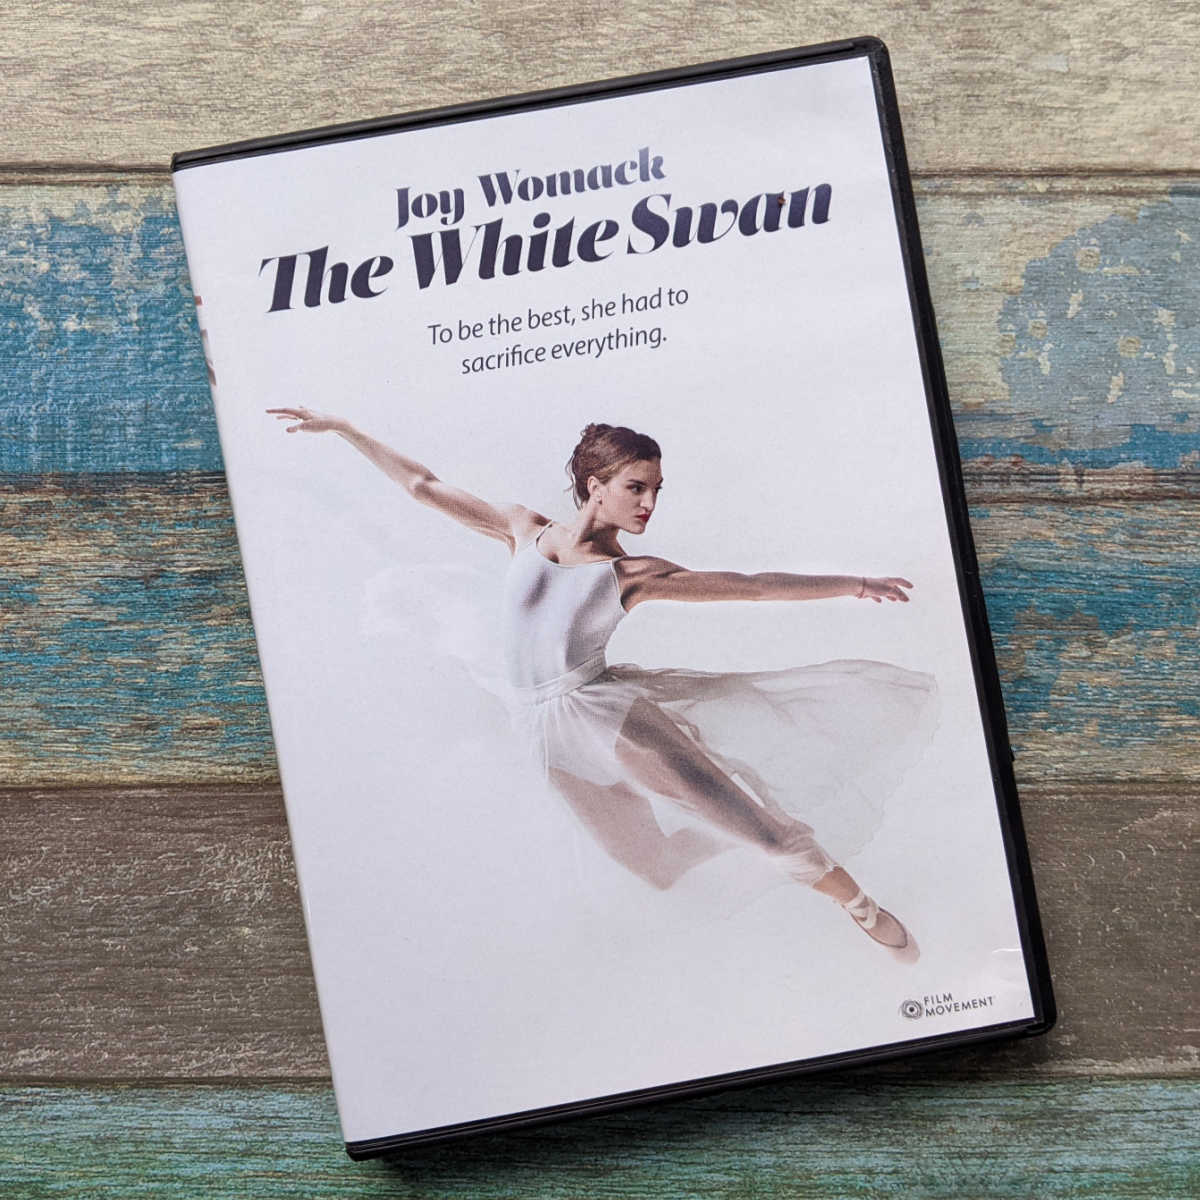 Watch Joy Womack: The White Swan to be inspired by an Amercian ballerina's journey to Russia, the Bolshoi Ballet and Swan Lake.